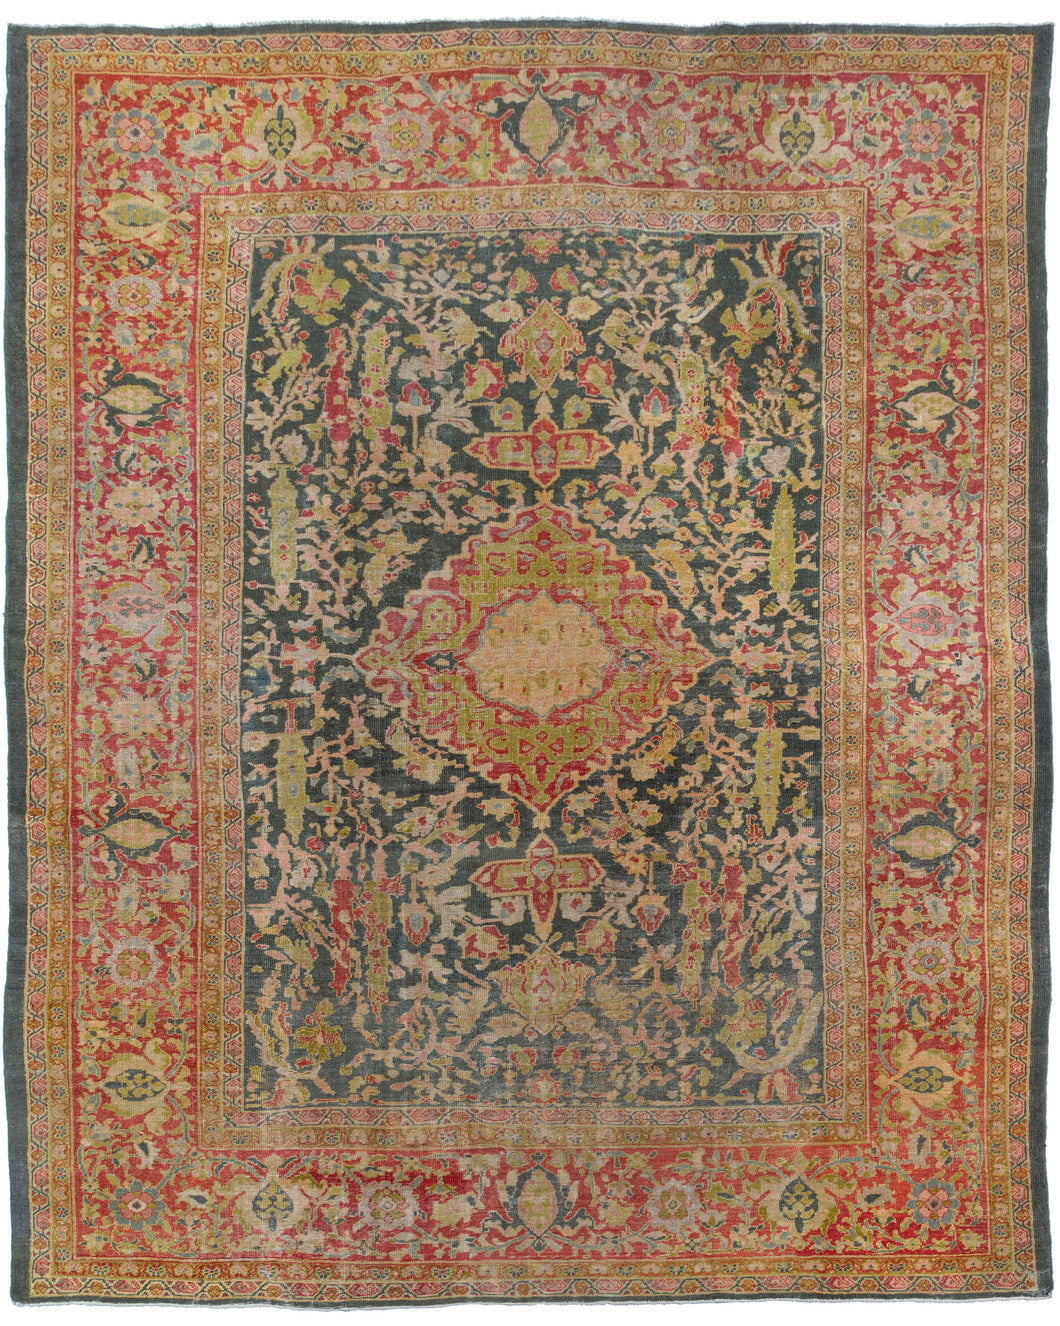 This Antique Green Sultanabad  features a central medallion on a rare green ground. The field is full of flowering vines cypress trees and various abstracted animals which blend right in. The dark green ground rich lacquer contrast nicely with softer tones of periwinkle, coral, lilac, chartreuse, and sherbert.  The wide and eclectic color range works together to create a harmonious whole. 